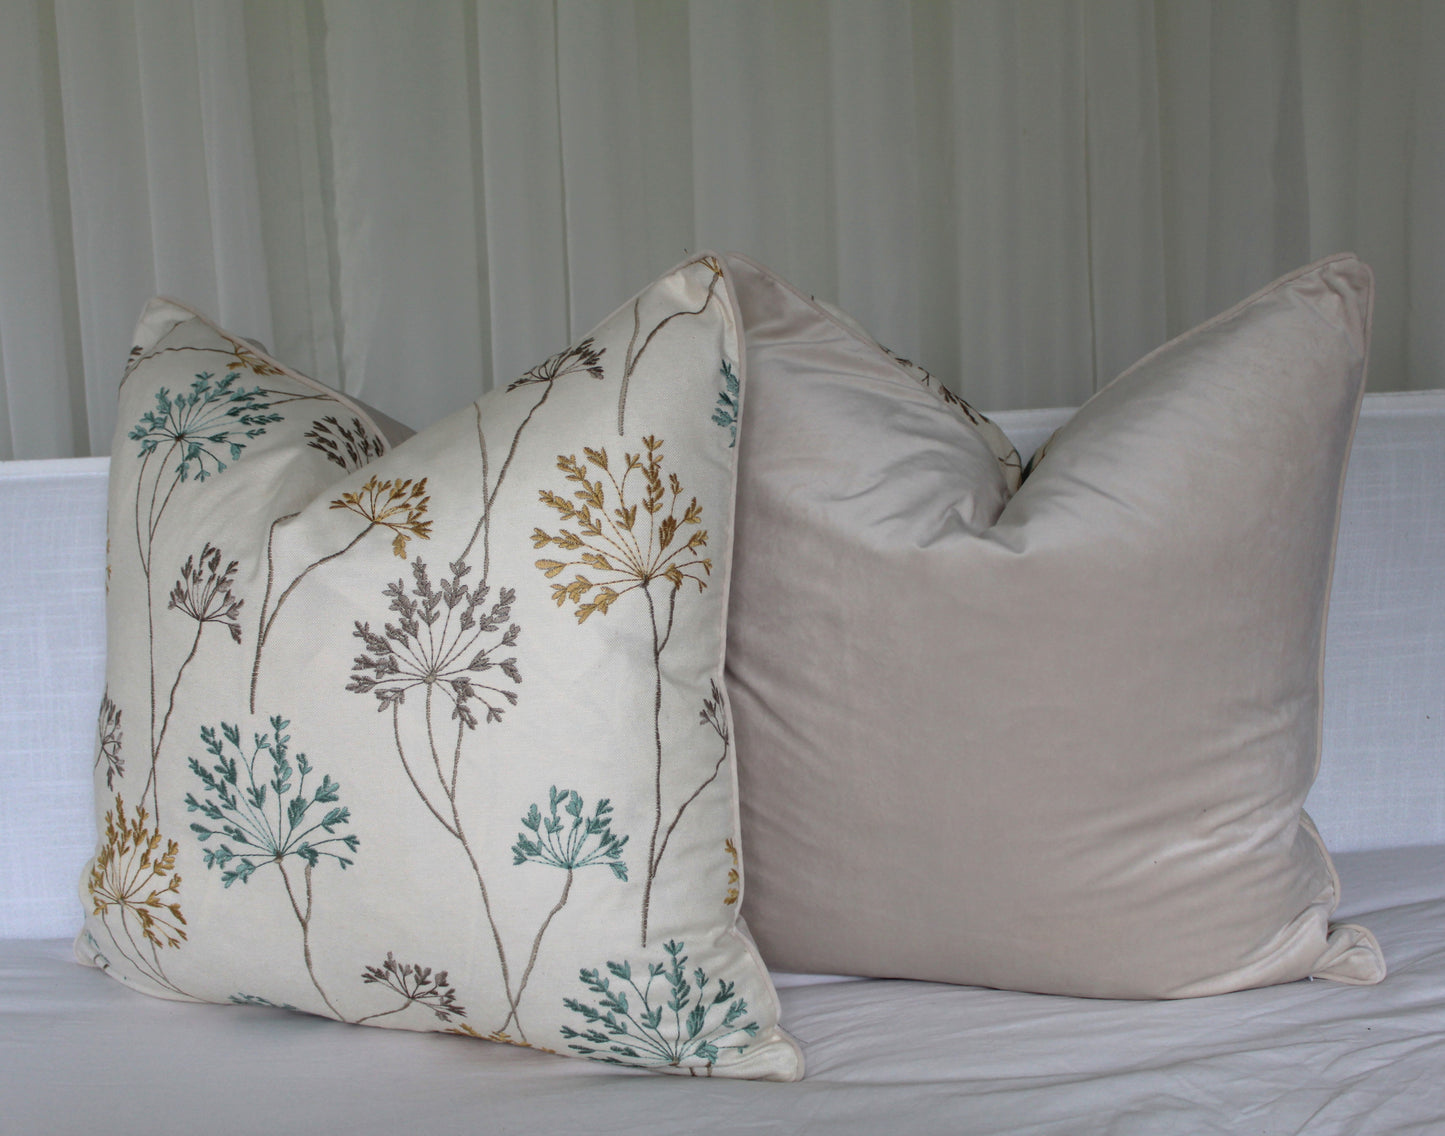 Embroidered Cushion covers. Made in Australia